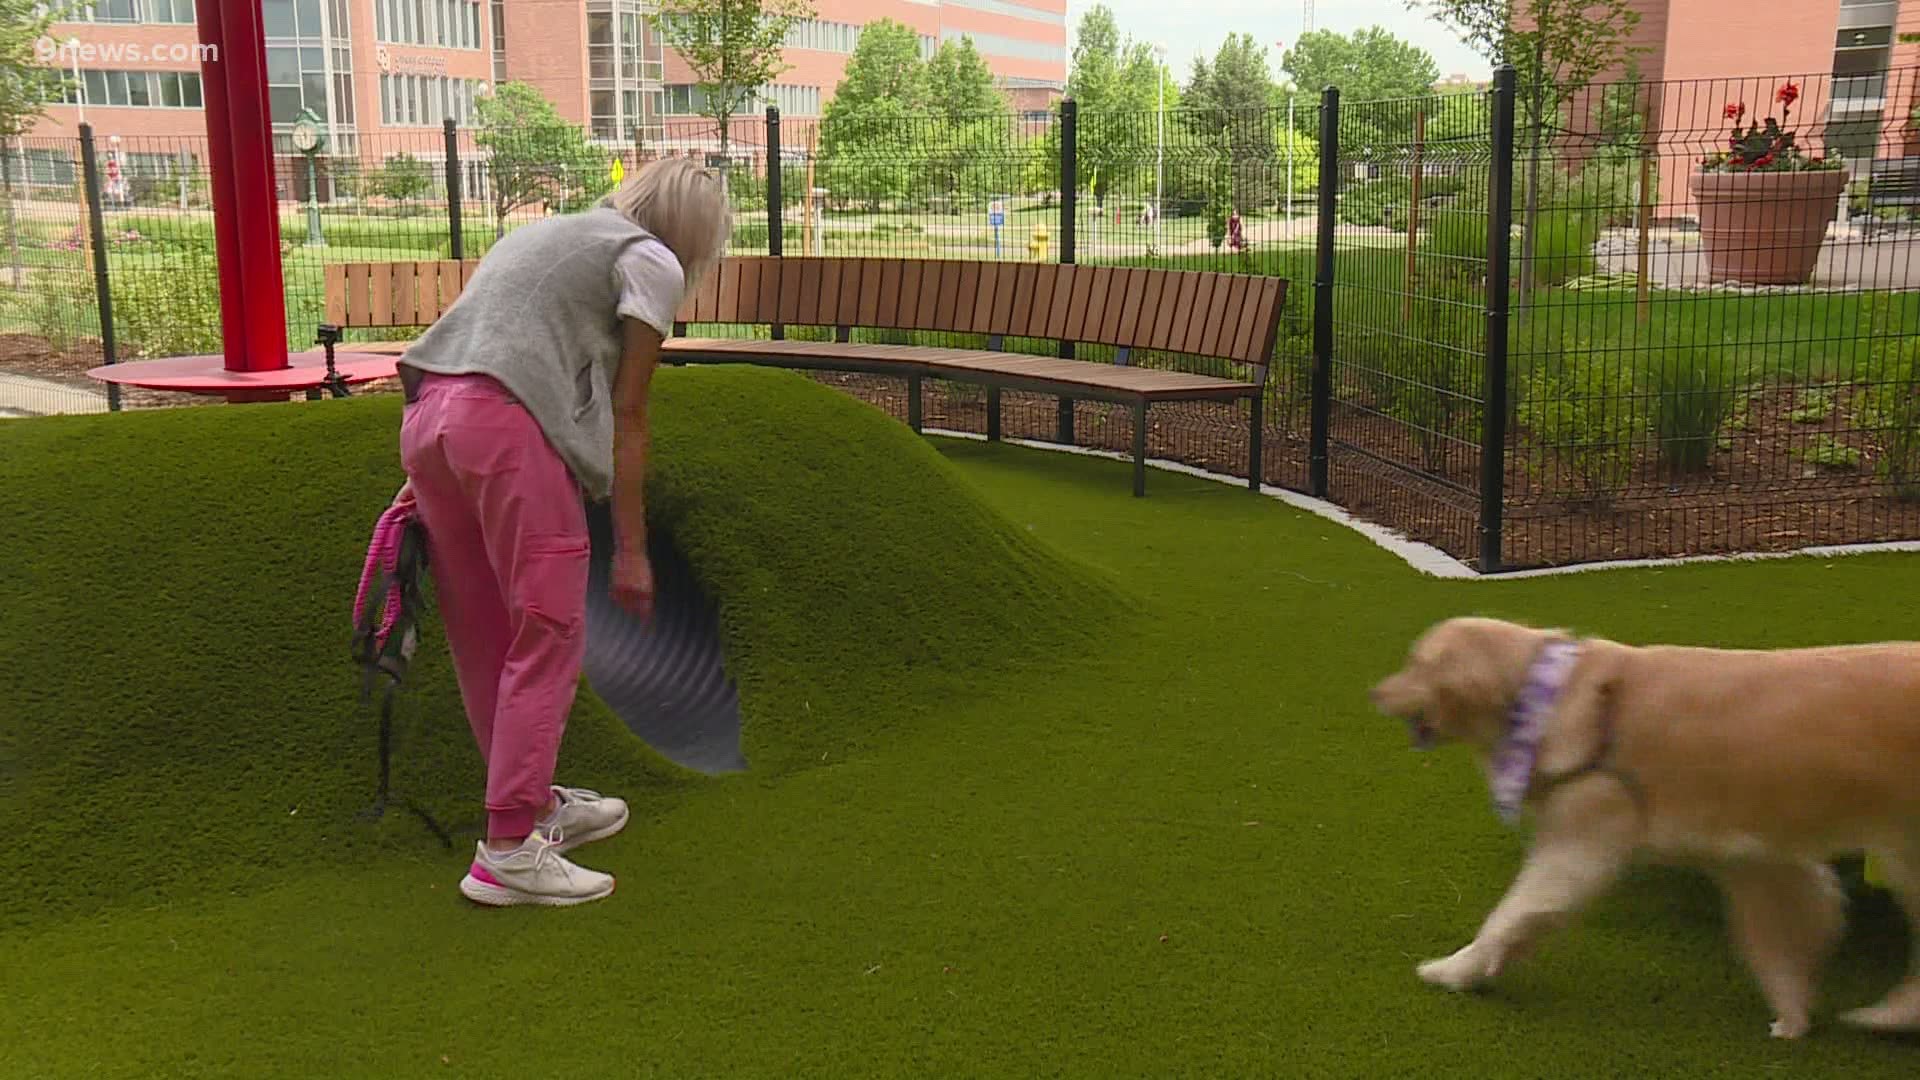 Children's Hospital Colorado builds a park for their medical dogs to rest during their shifts.